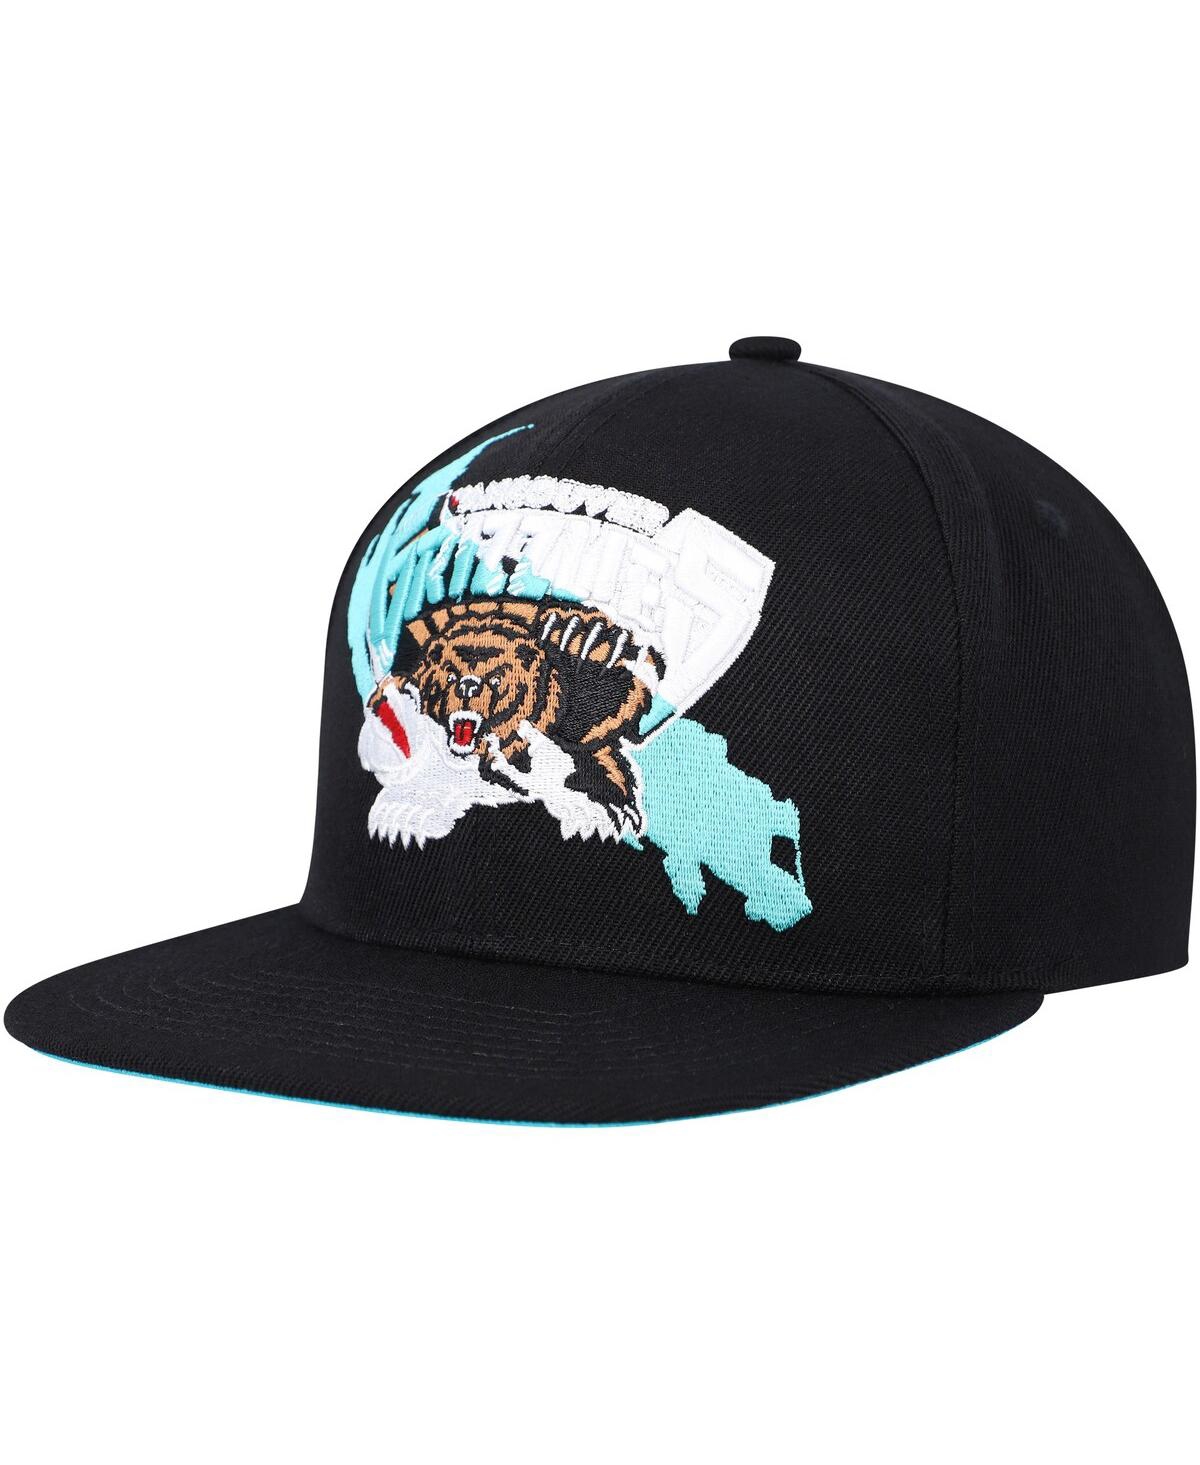 Mitchell & Ness Men's  Black Vancouver Grizzlies Paint By Numbers Snapback Hat